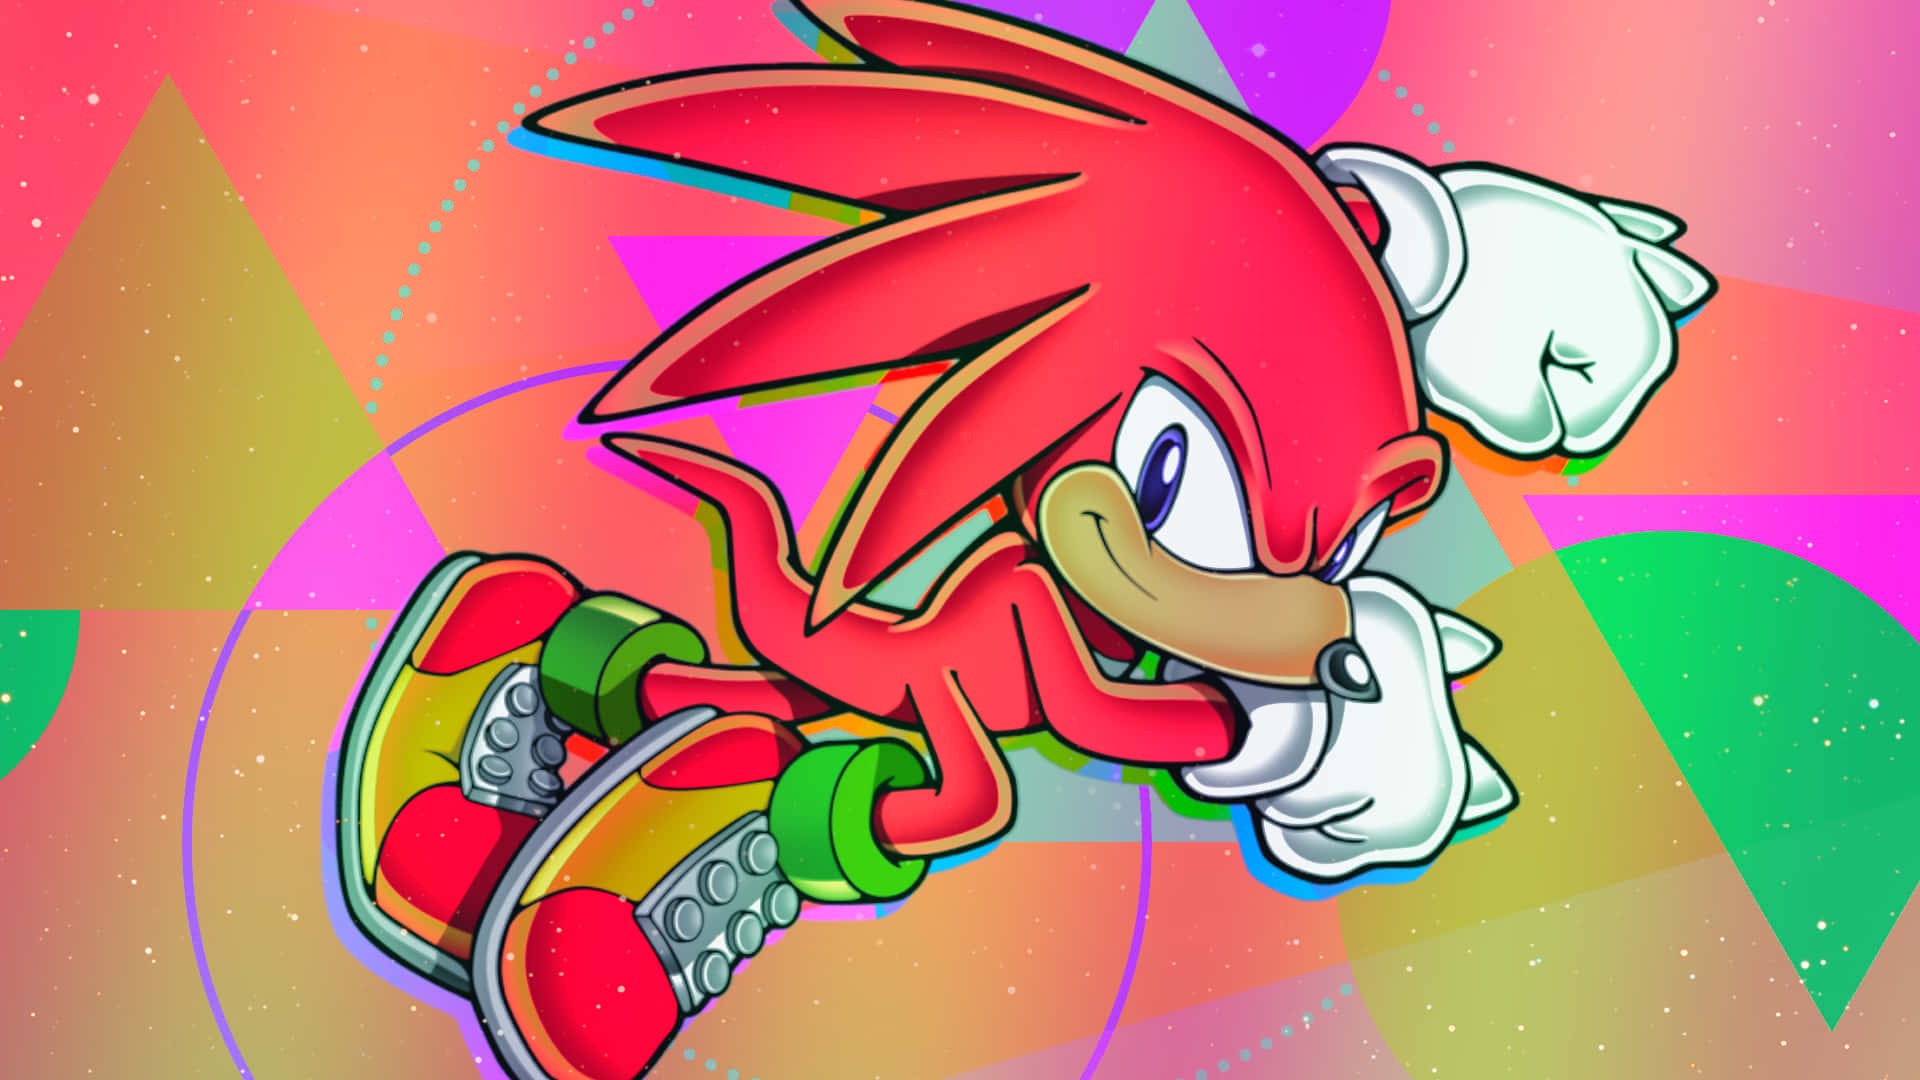 Knuckles wallpaper by ChippTempest  Download on ZEDGE  3930